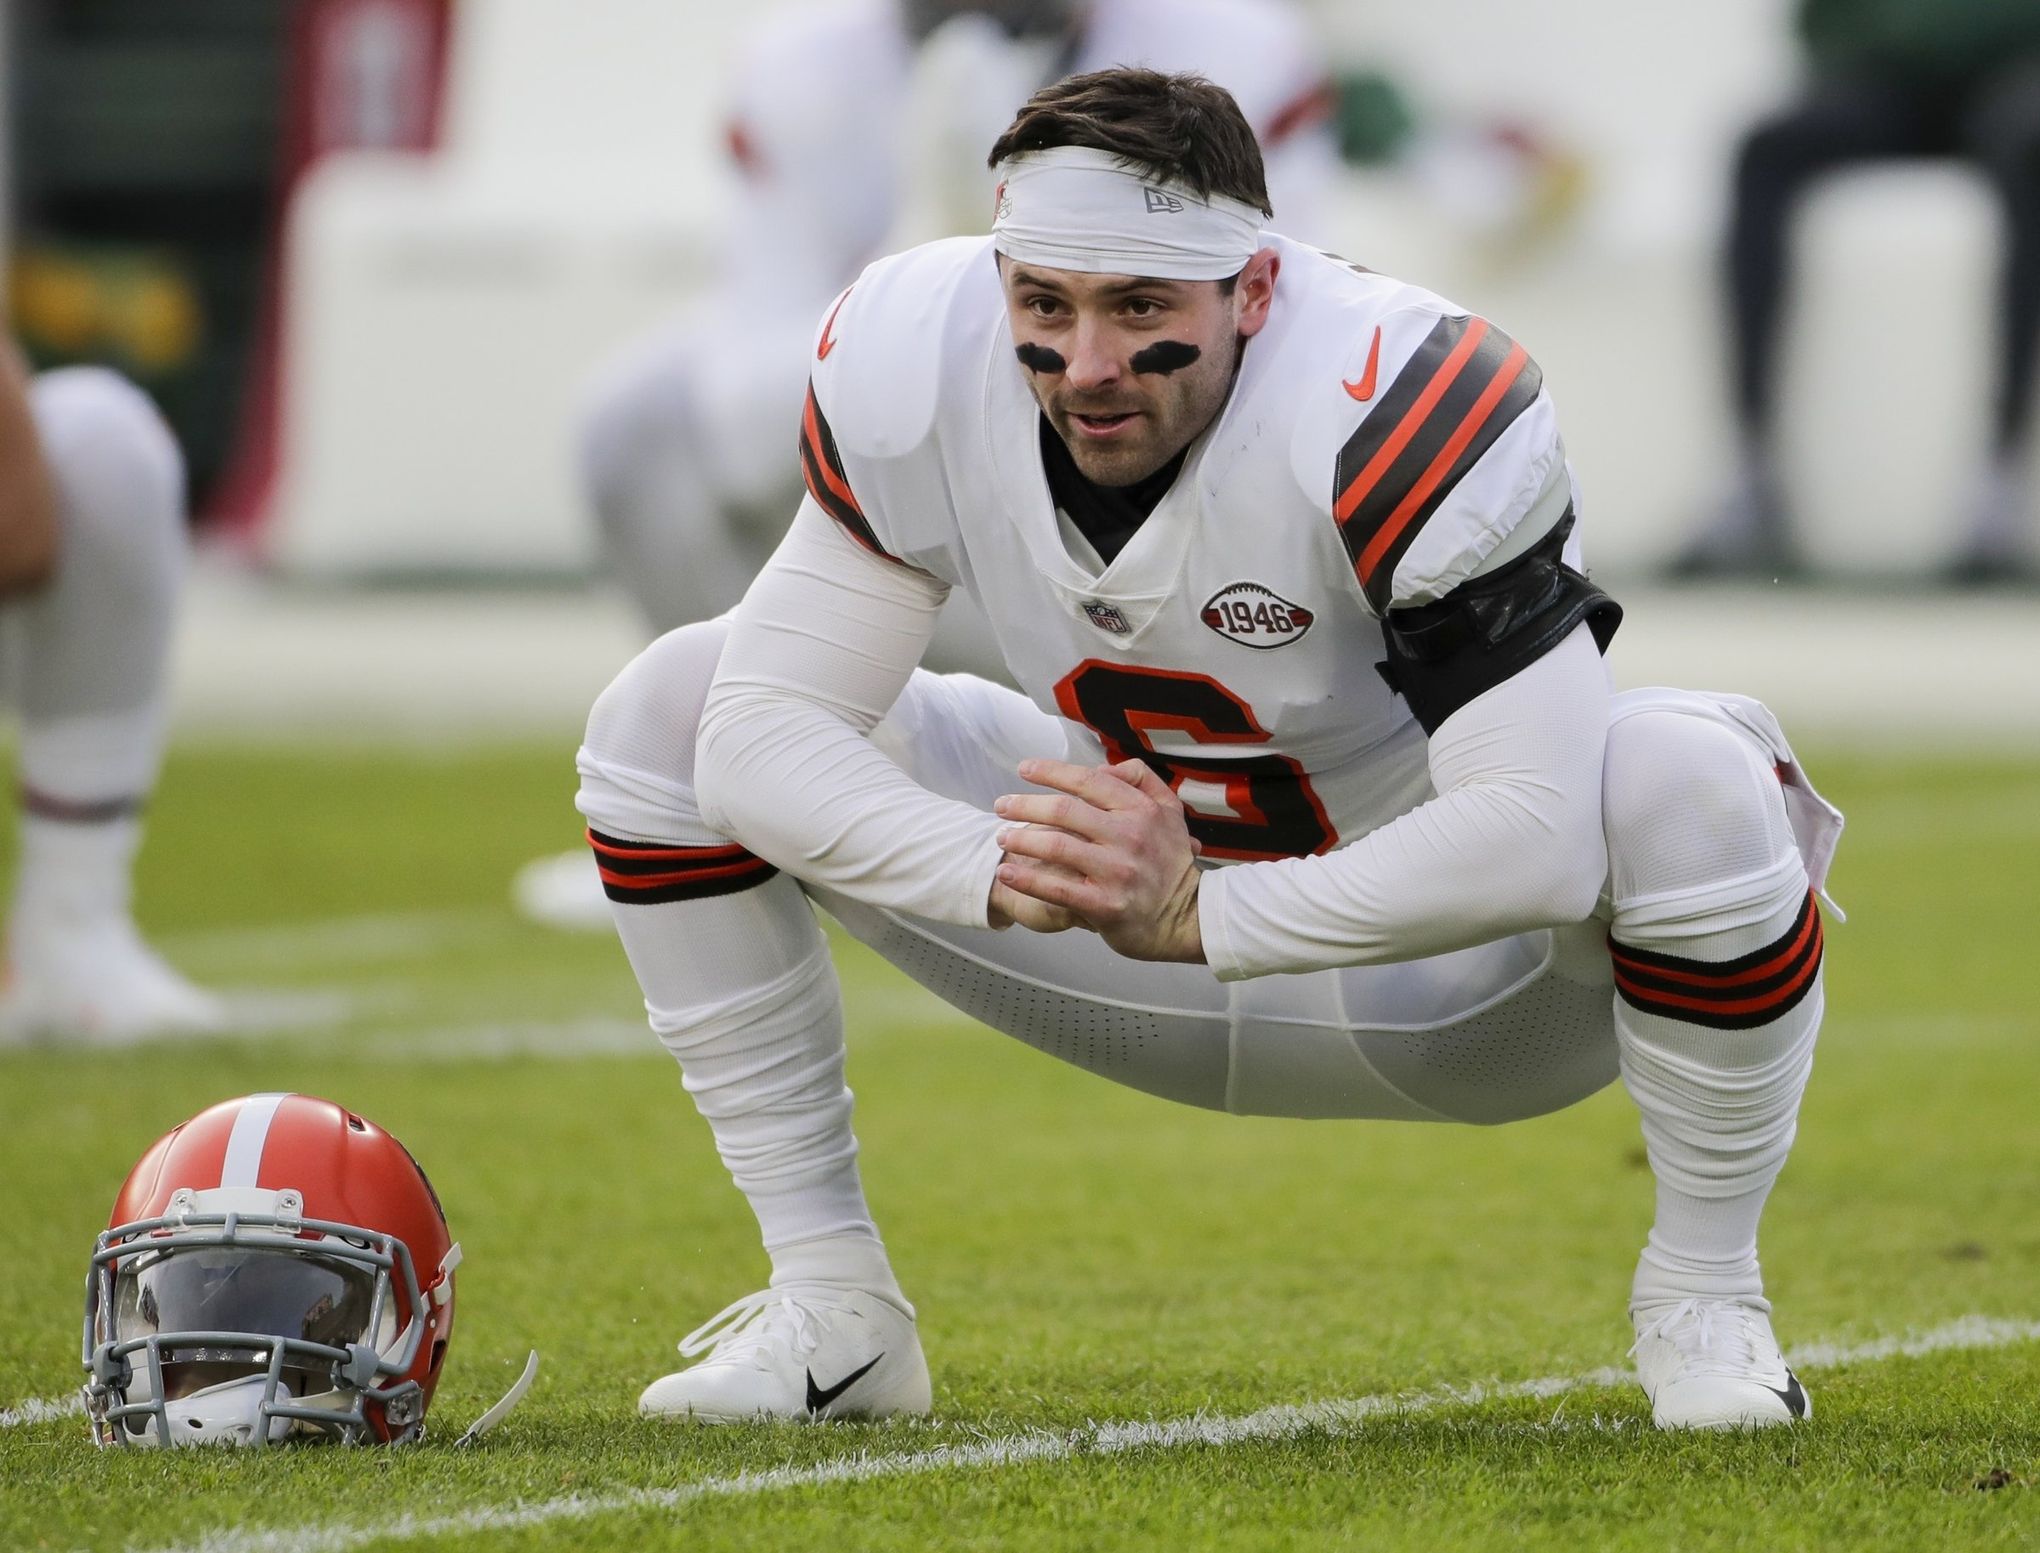 Don't expect rumors connecting the Seahawks to Baker Mayfield to